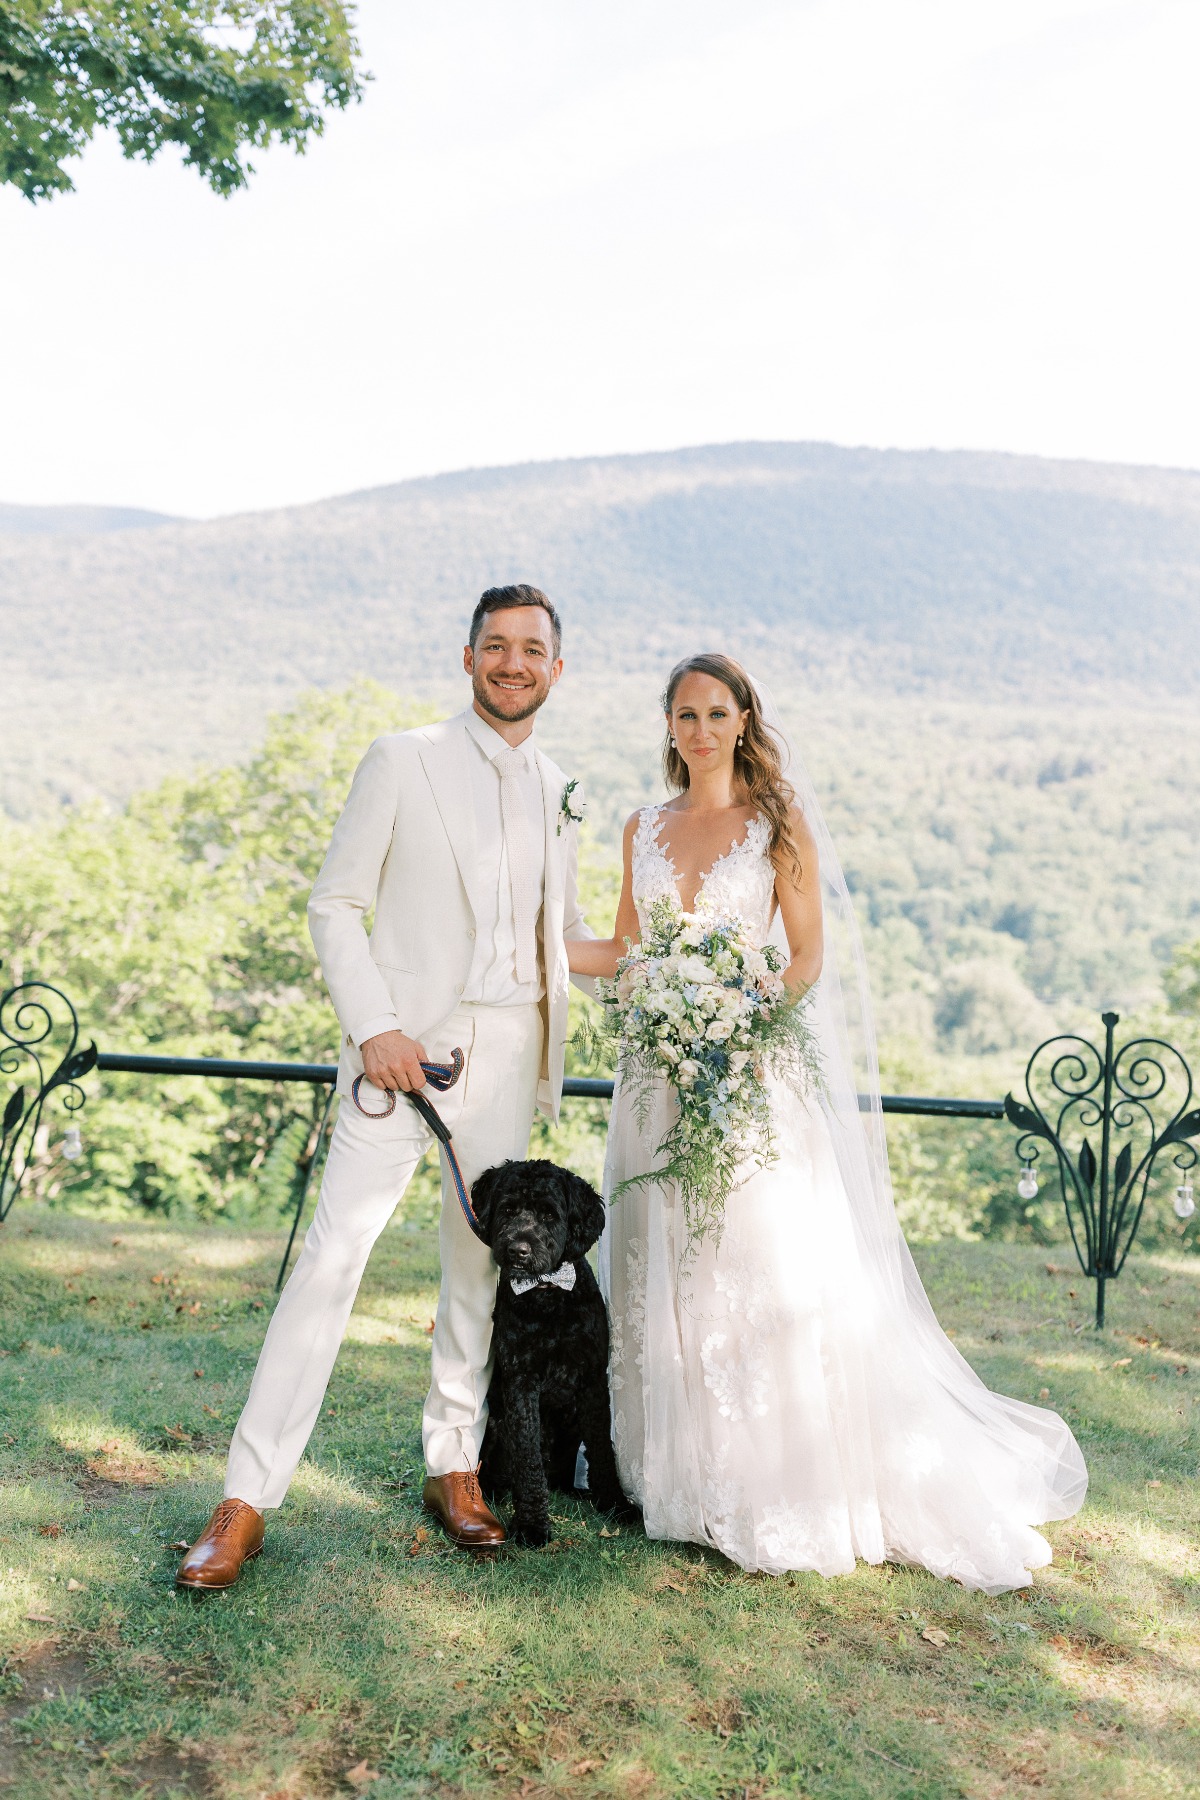 Elegant Vermont bride and groom with adorable dog ring bearer